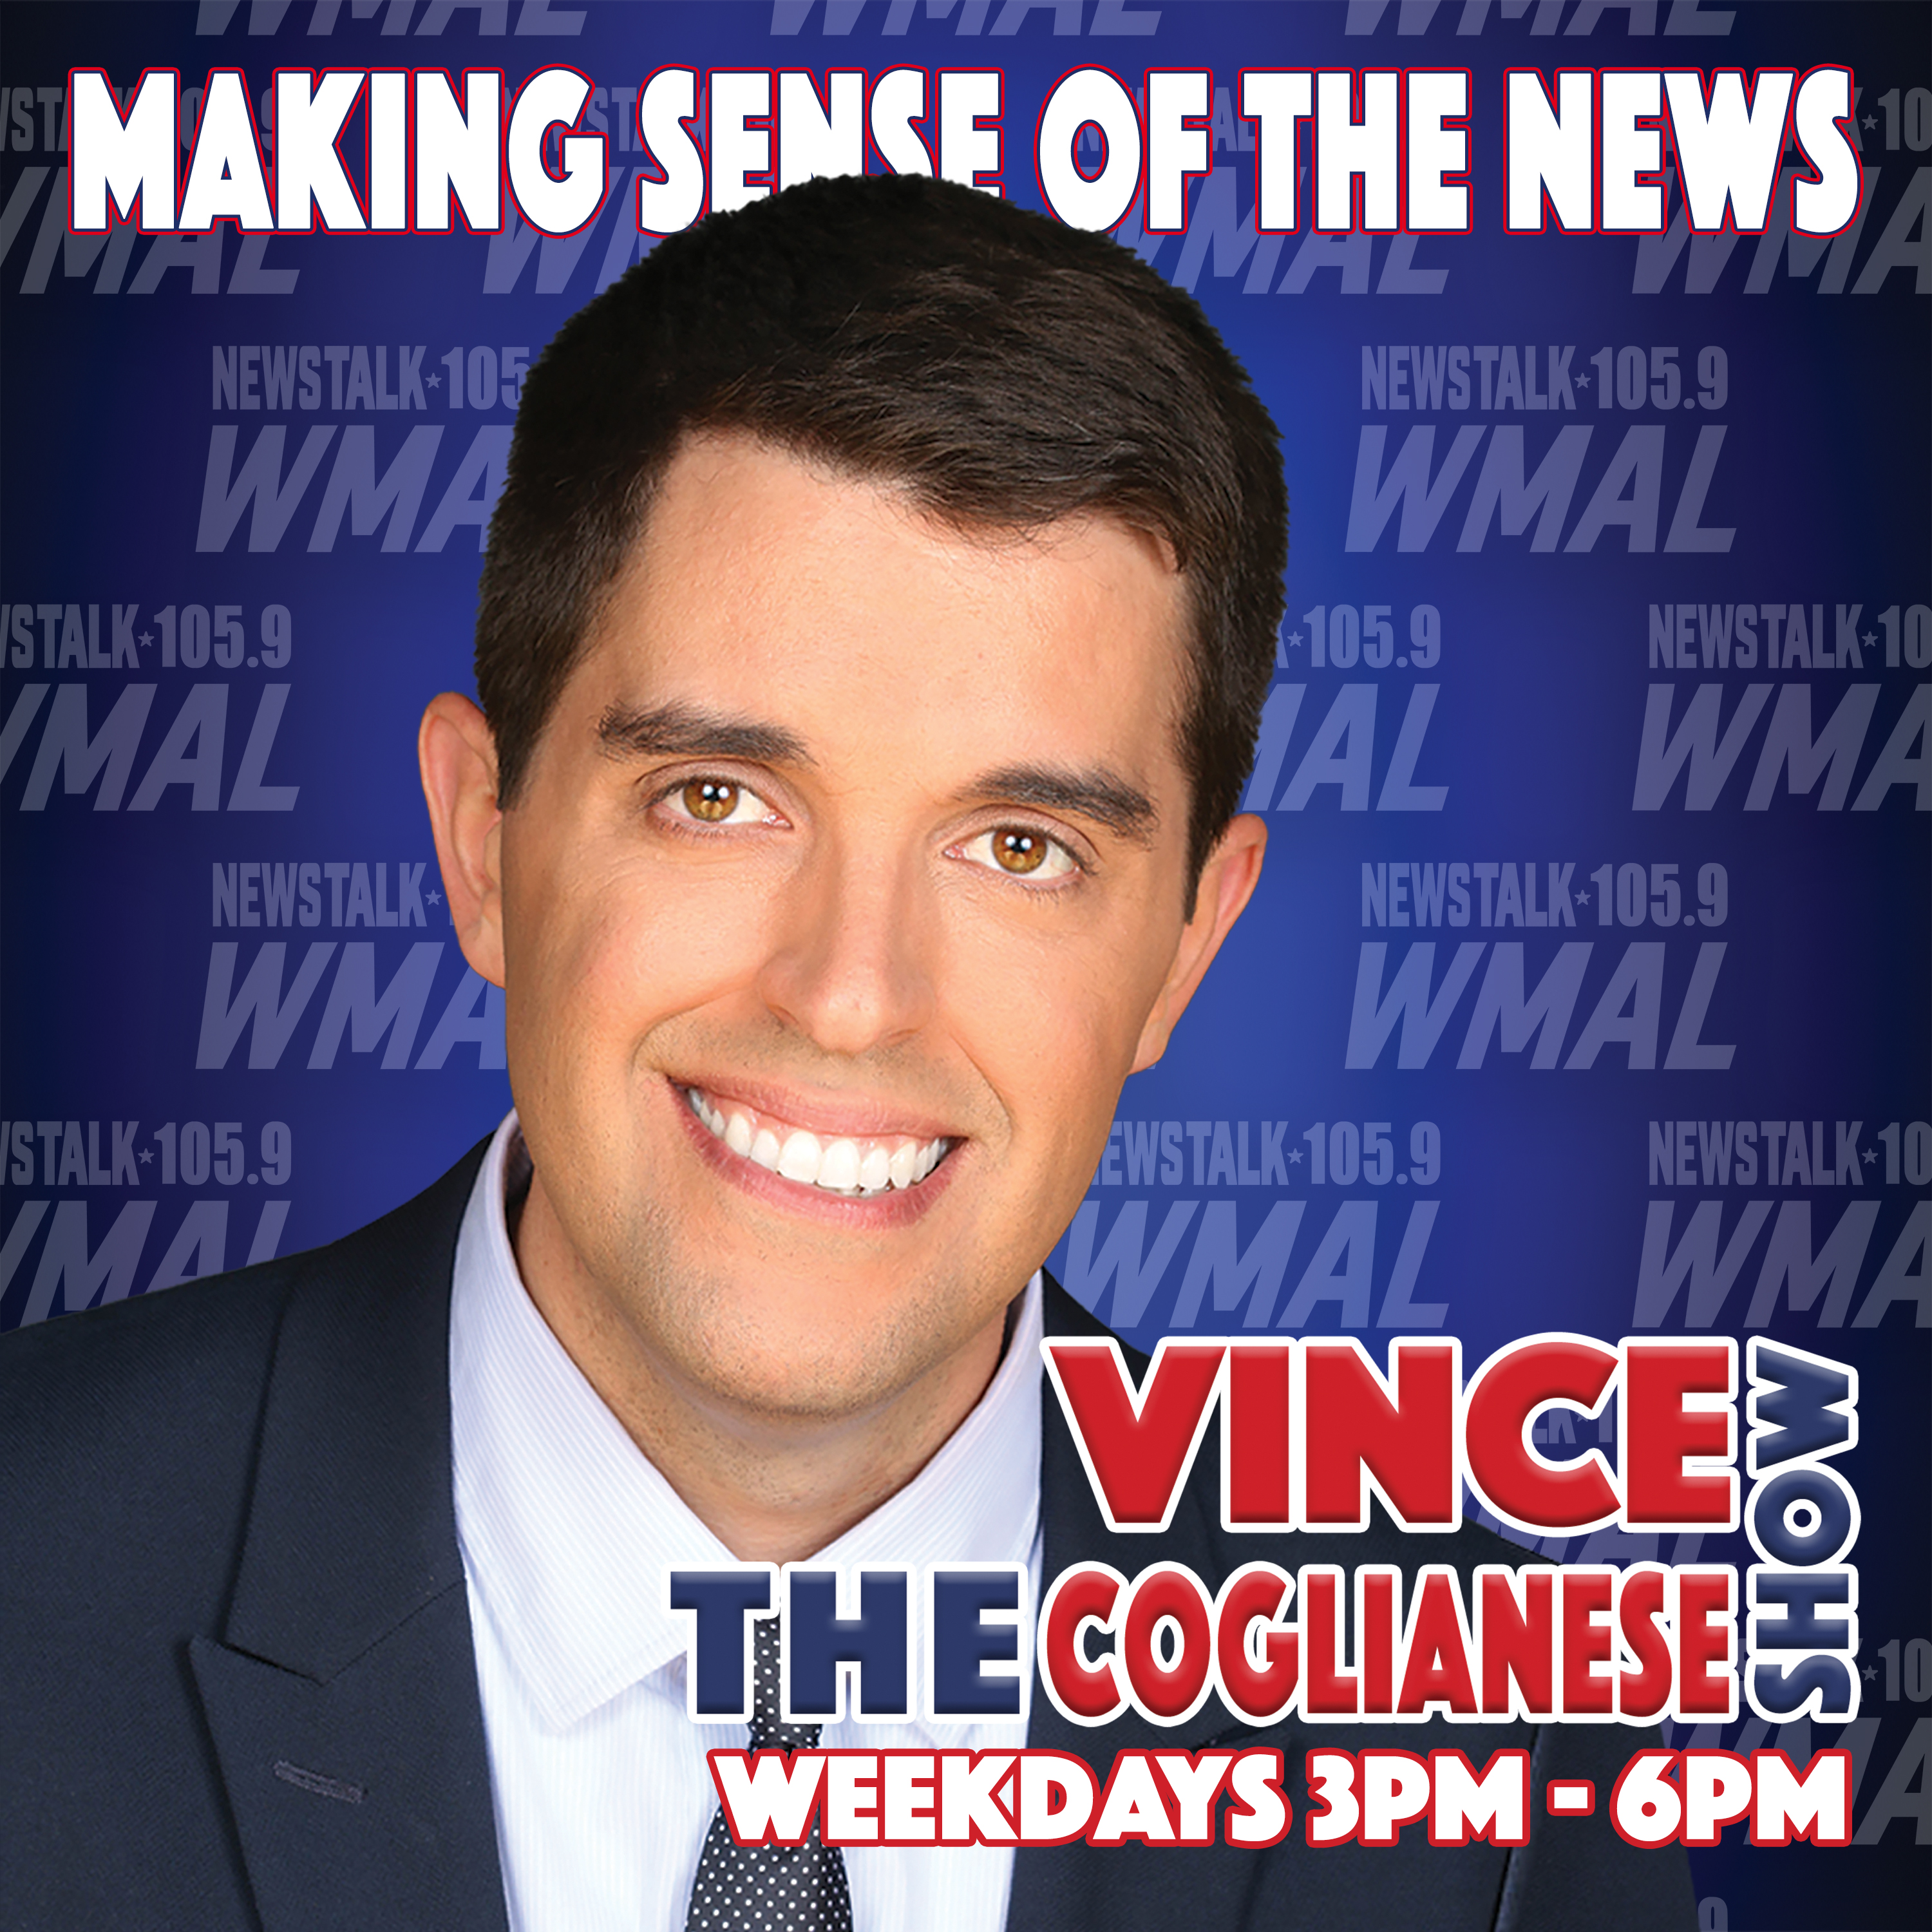 The Vince Coglianese Show - Rep. Andy Harris - 06.15.21